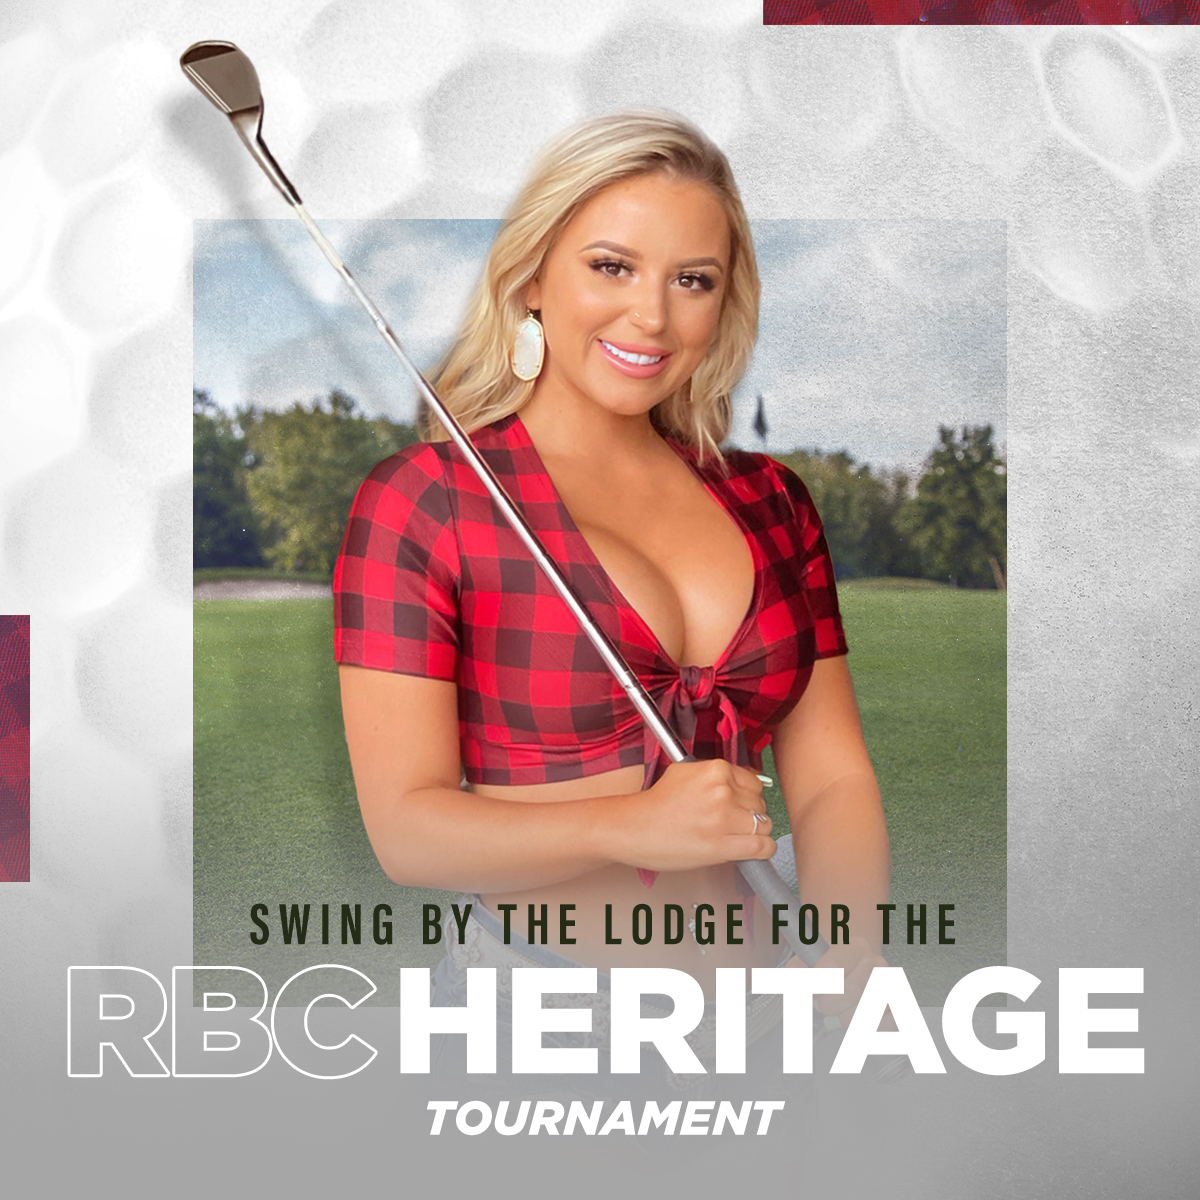 The RBC Heritage tournament is in full swing at the Harbour Town Links in South Carolina. Put on your finest plaid and pull up a seat for live tournament feeds all weekend. #twinpeaks #twinpeaksrestaurants #twinpeaksgirls #pga #golf #bestviewsinthegame #sportsbar